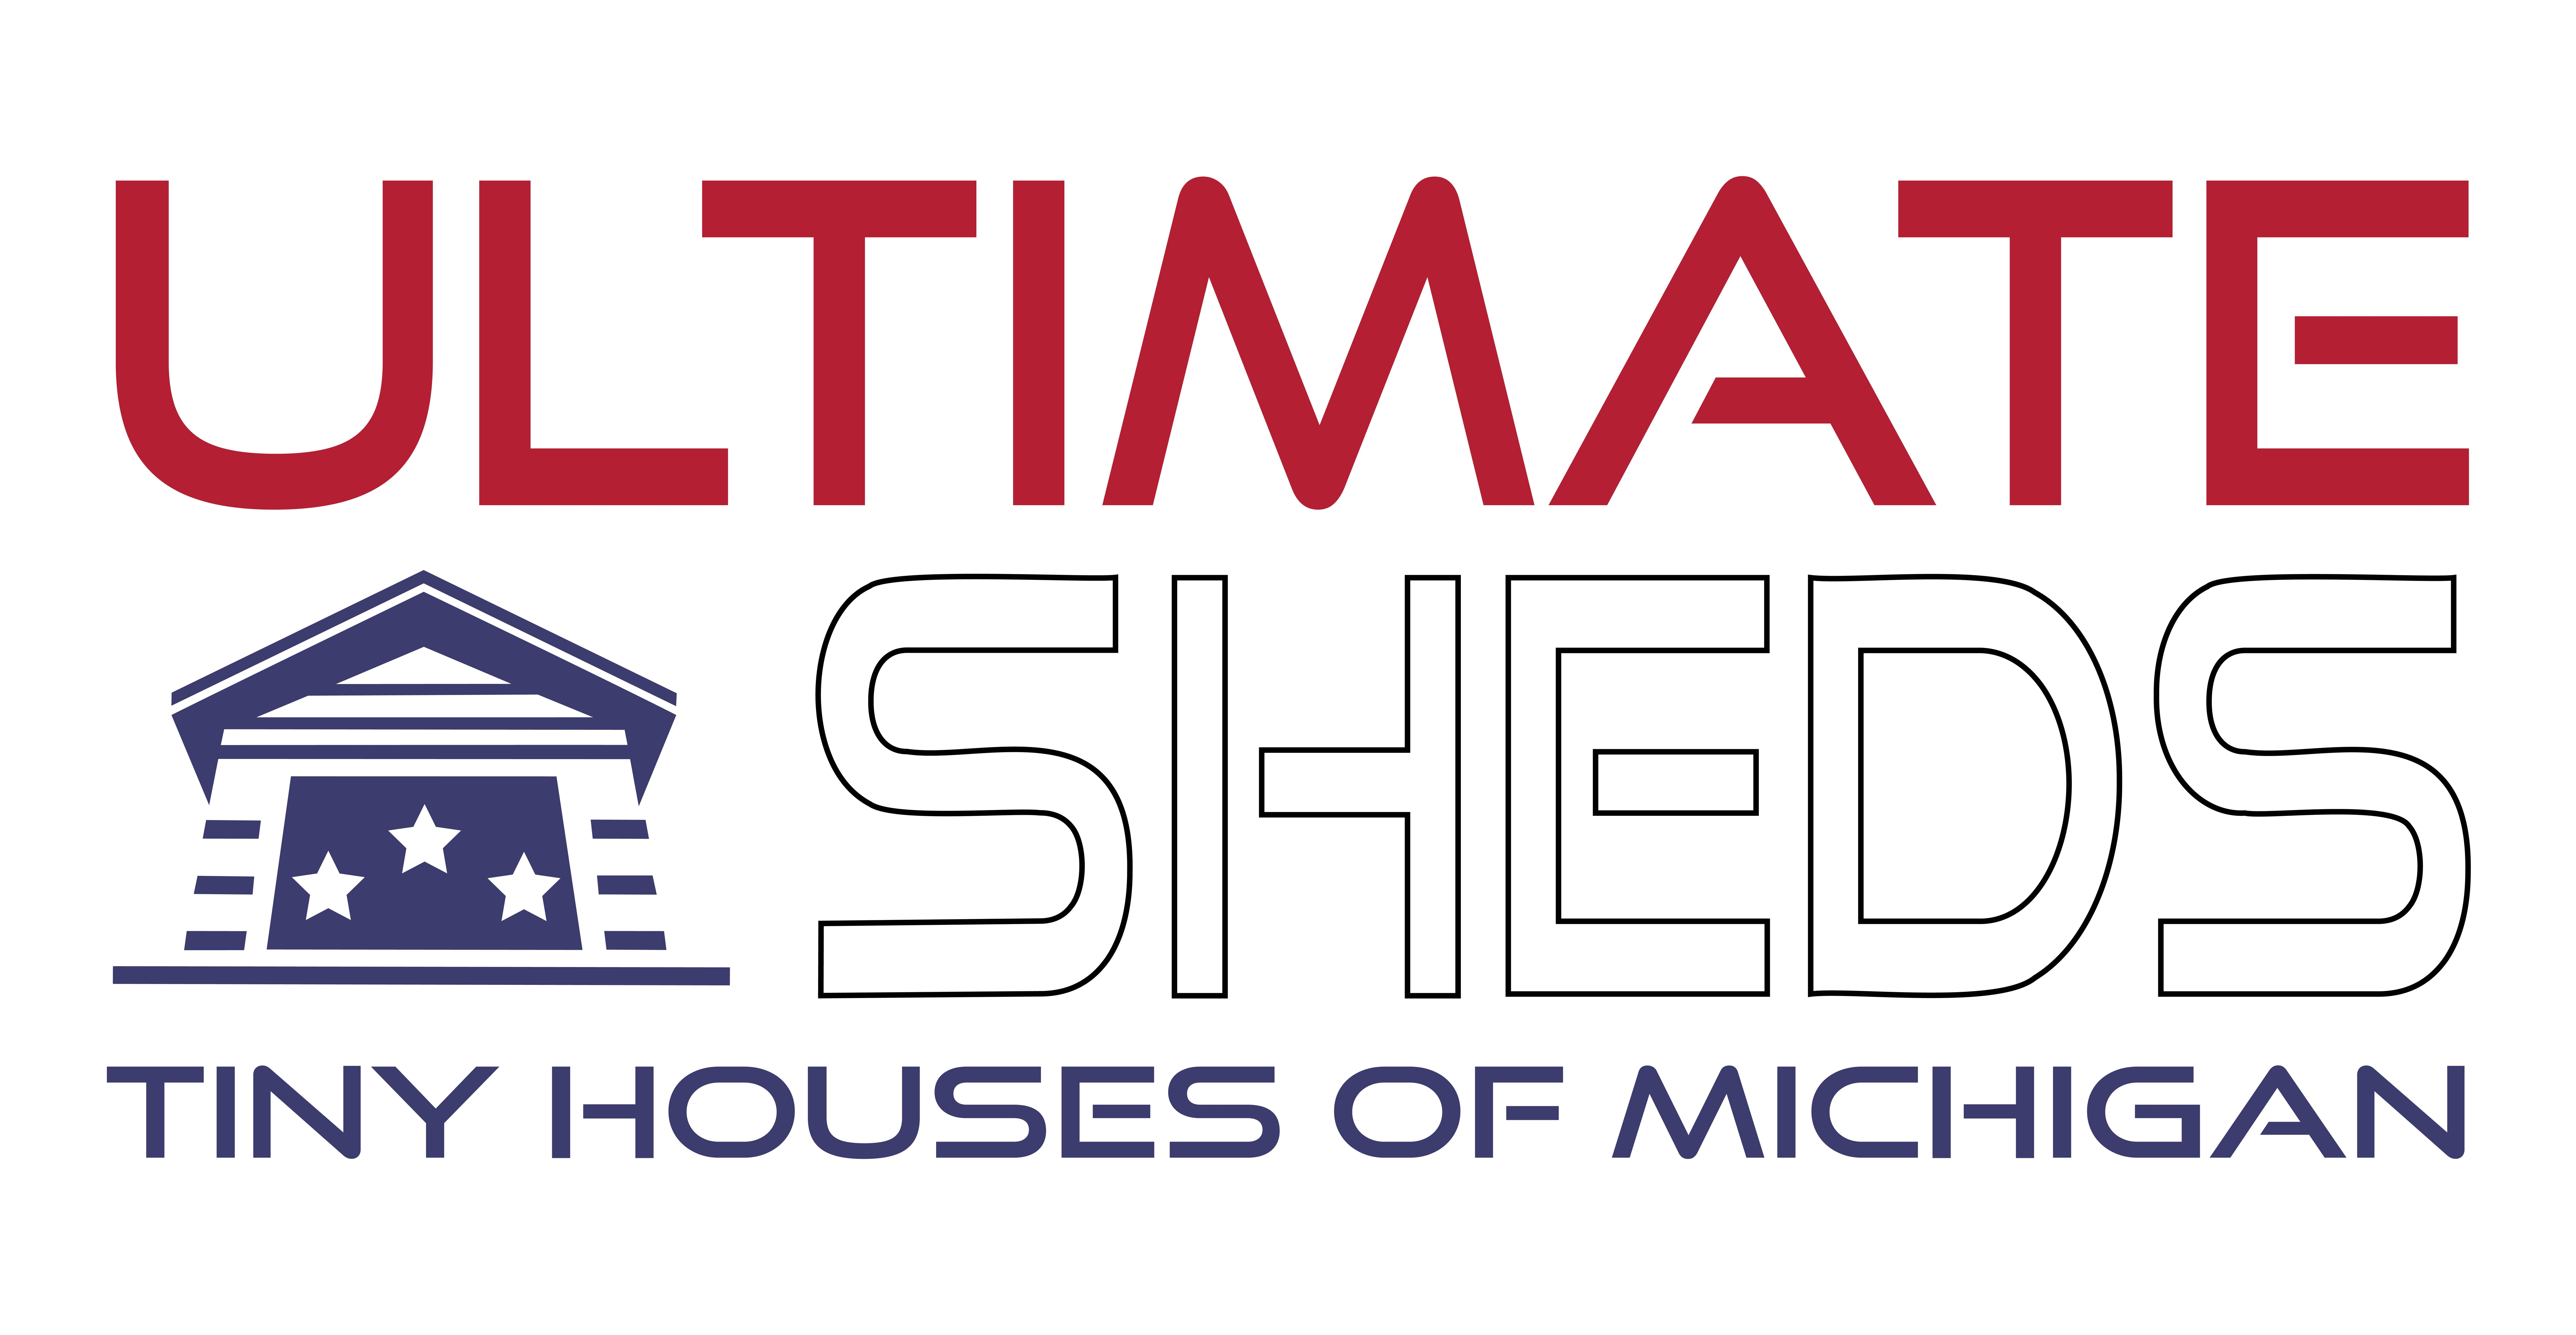 Ultimate Sheds, Tiny Houses of Michigan Logo